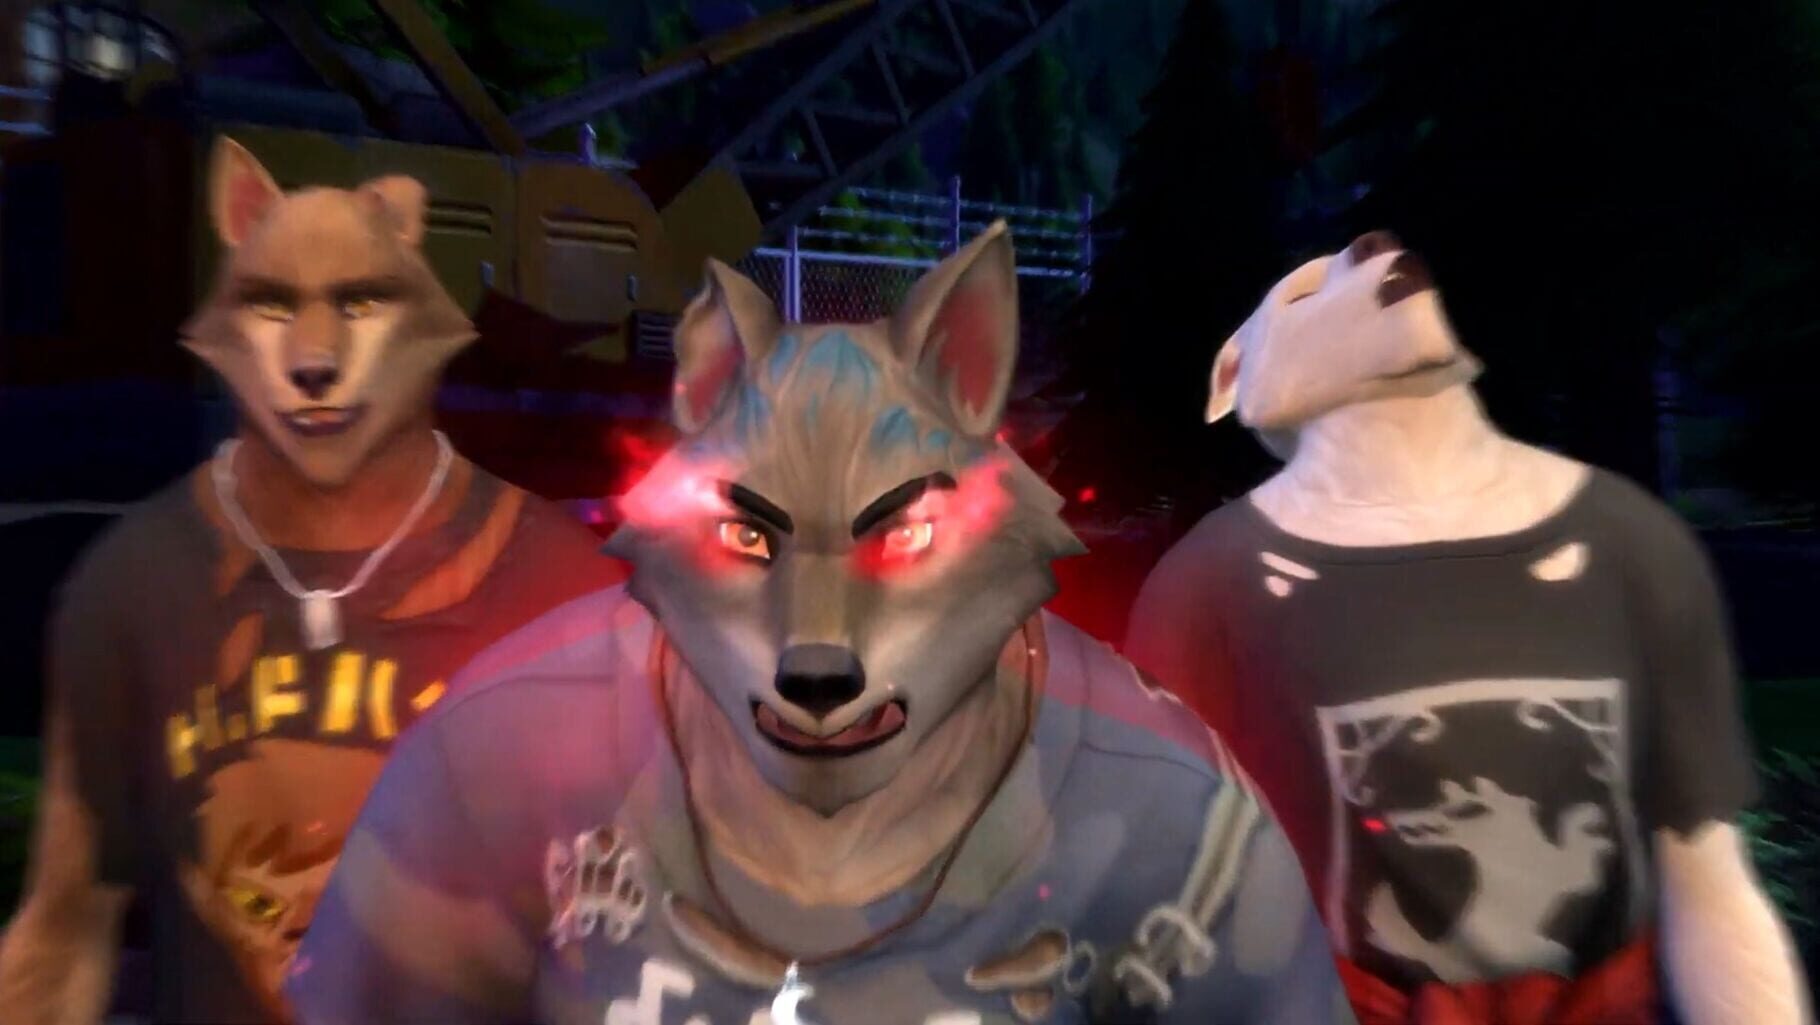 The Sims 4: Werewolves Image